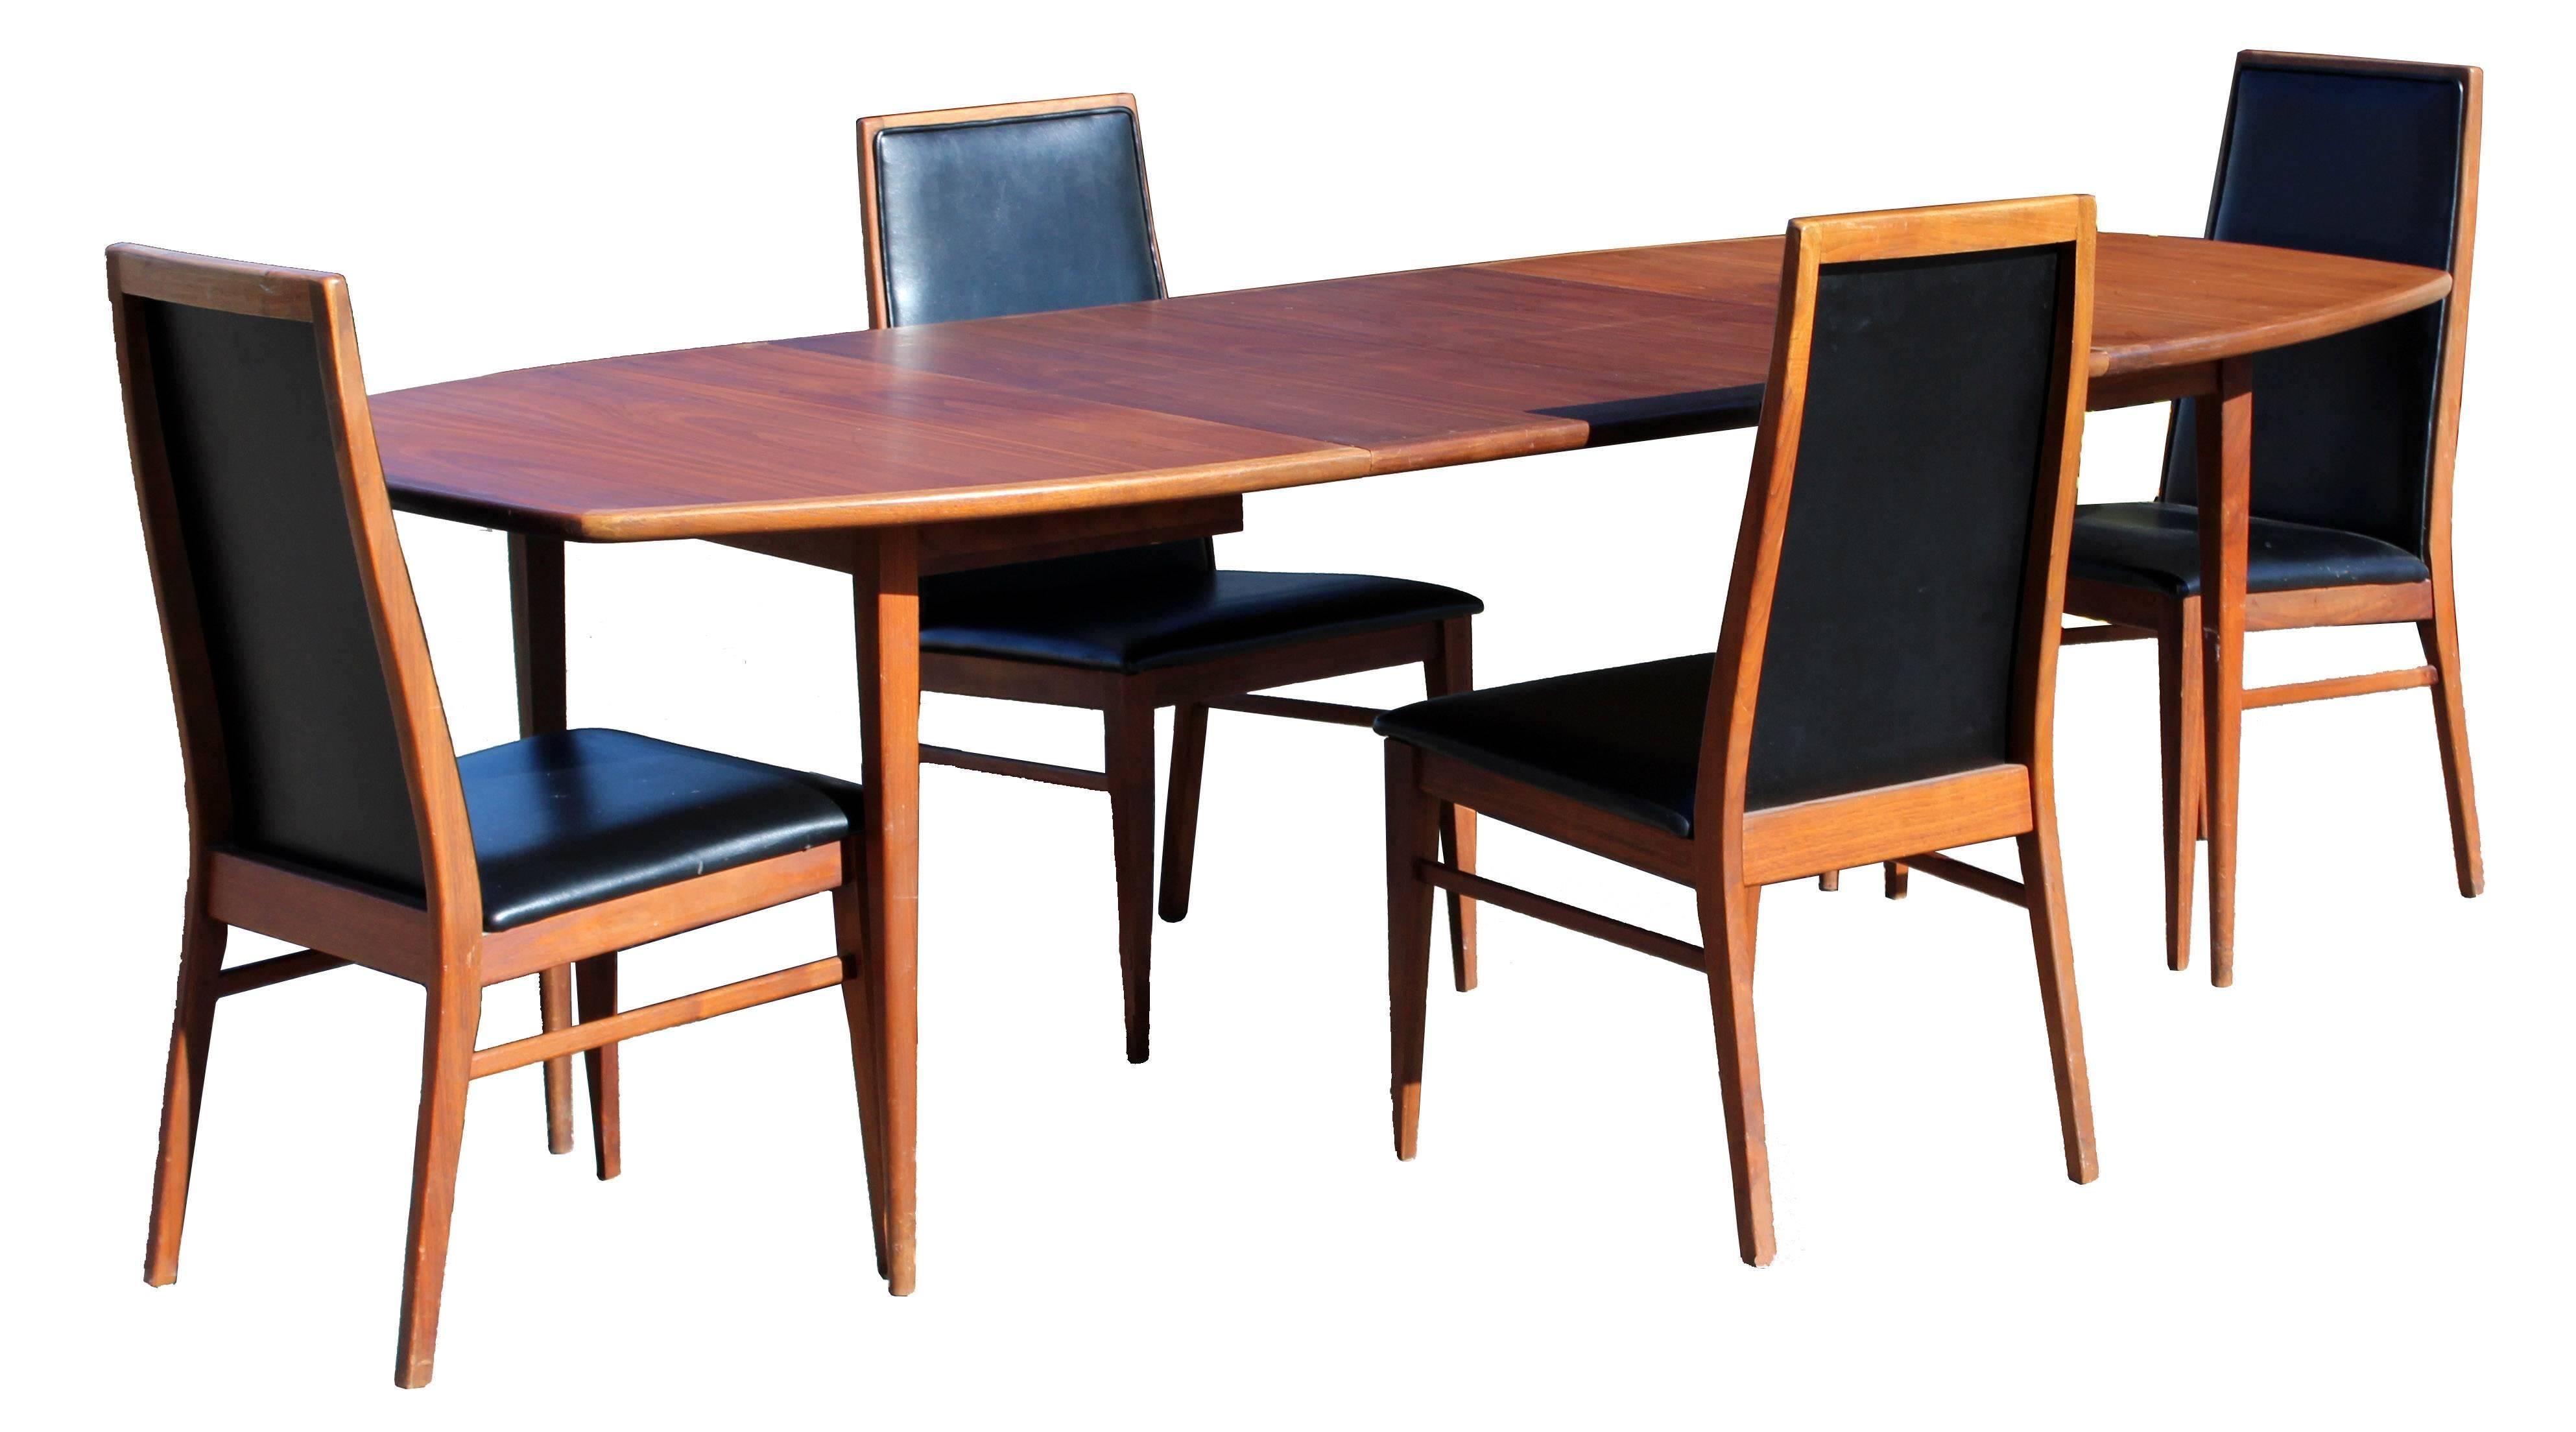 For your consideration is a fabulous dining set, made of walnut, including a dining table, with two leaves, four side dining chairs and a matching credenza, by Dillingham Furniture, circa 1970s. In excellent condition. The dimensions of the table